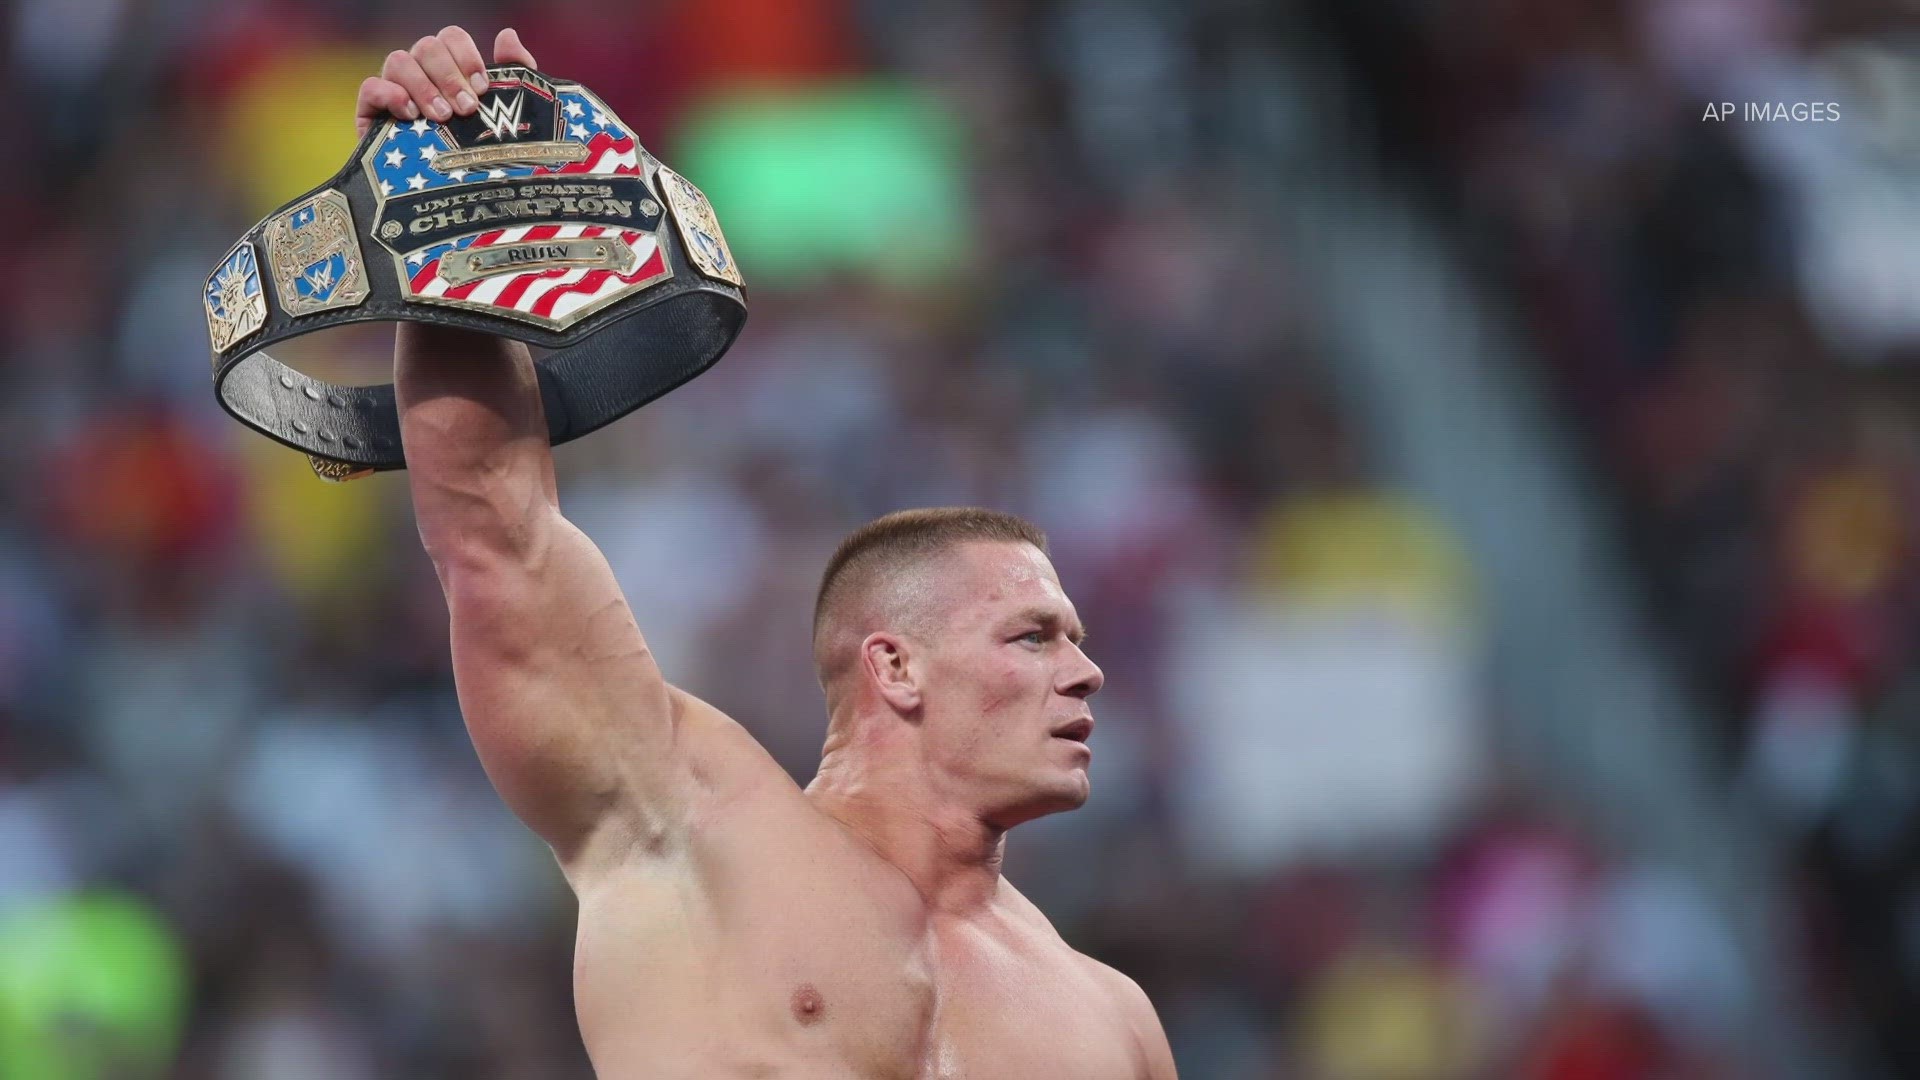 World Wrestling Entertainment announced John Cena will return to Colorado in September as part of the company's live "Friday Night SmackDown" television show.